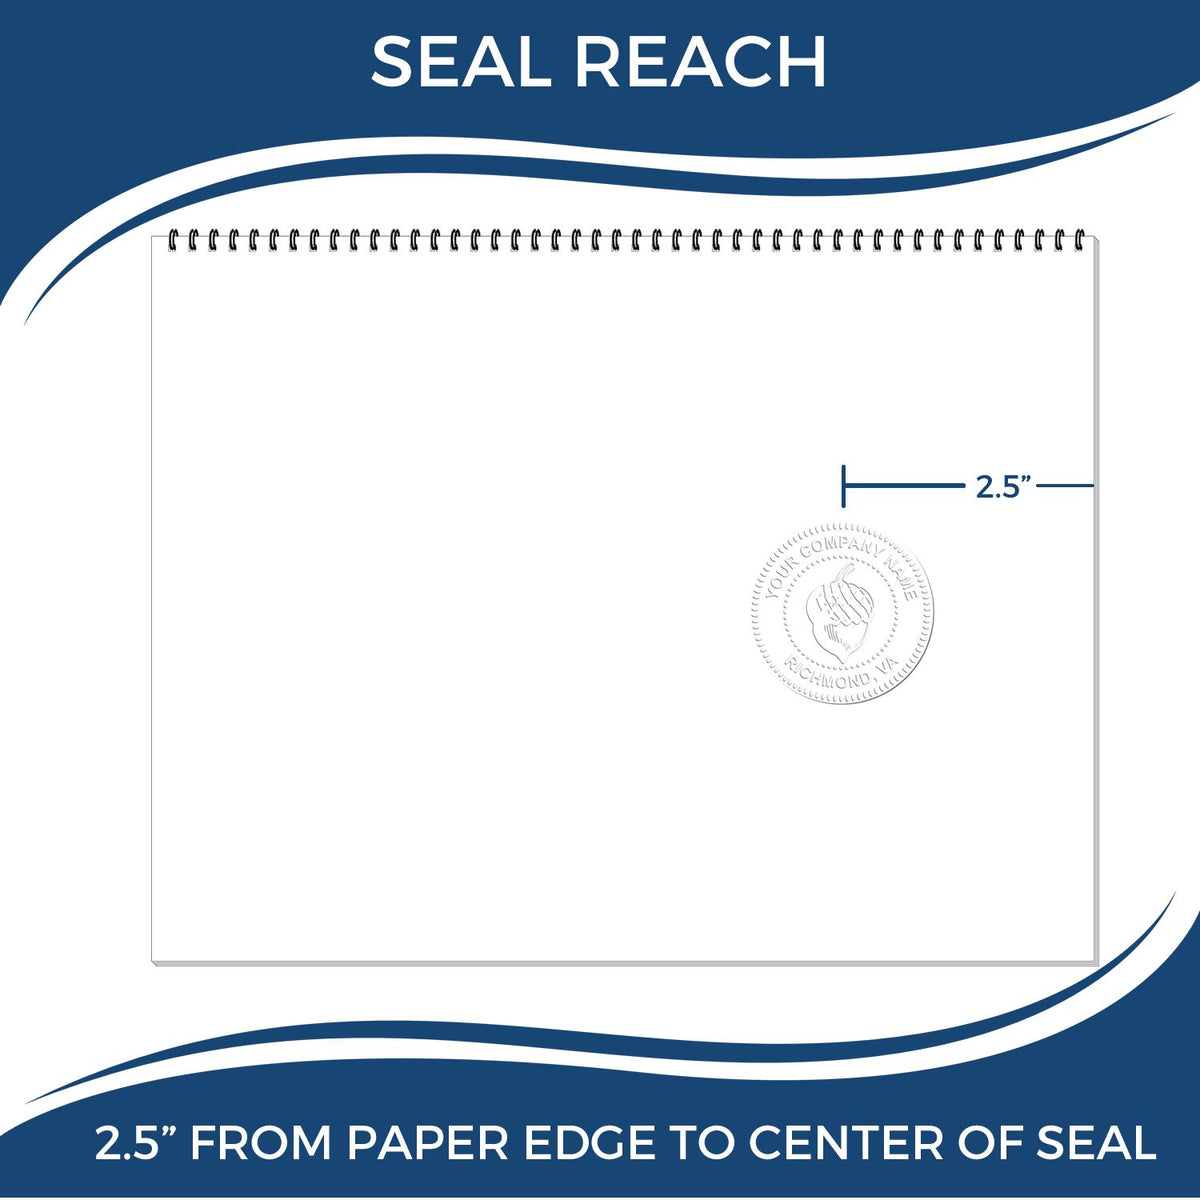 An infographic showing the seal reach which is represented by a ruler and a miniature seal image of the State of Connecticut Long Reach Architectural Embossing Seal